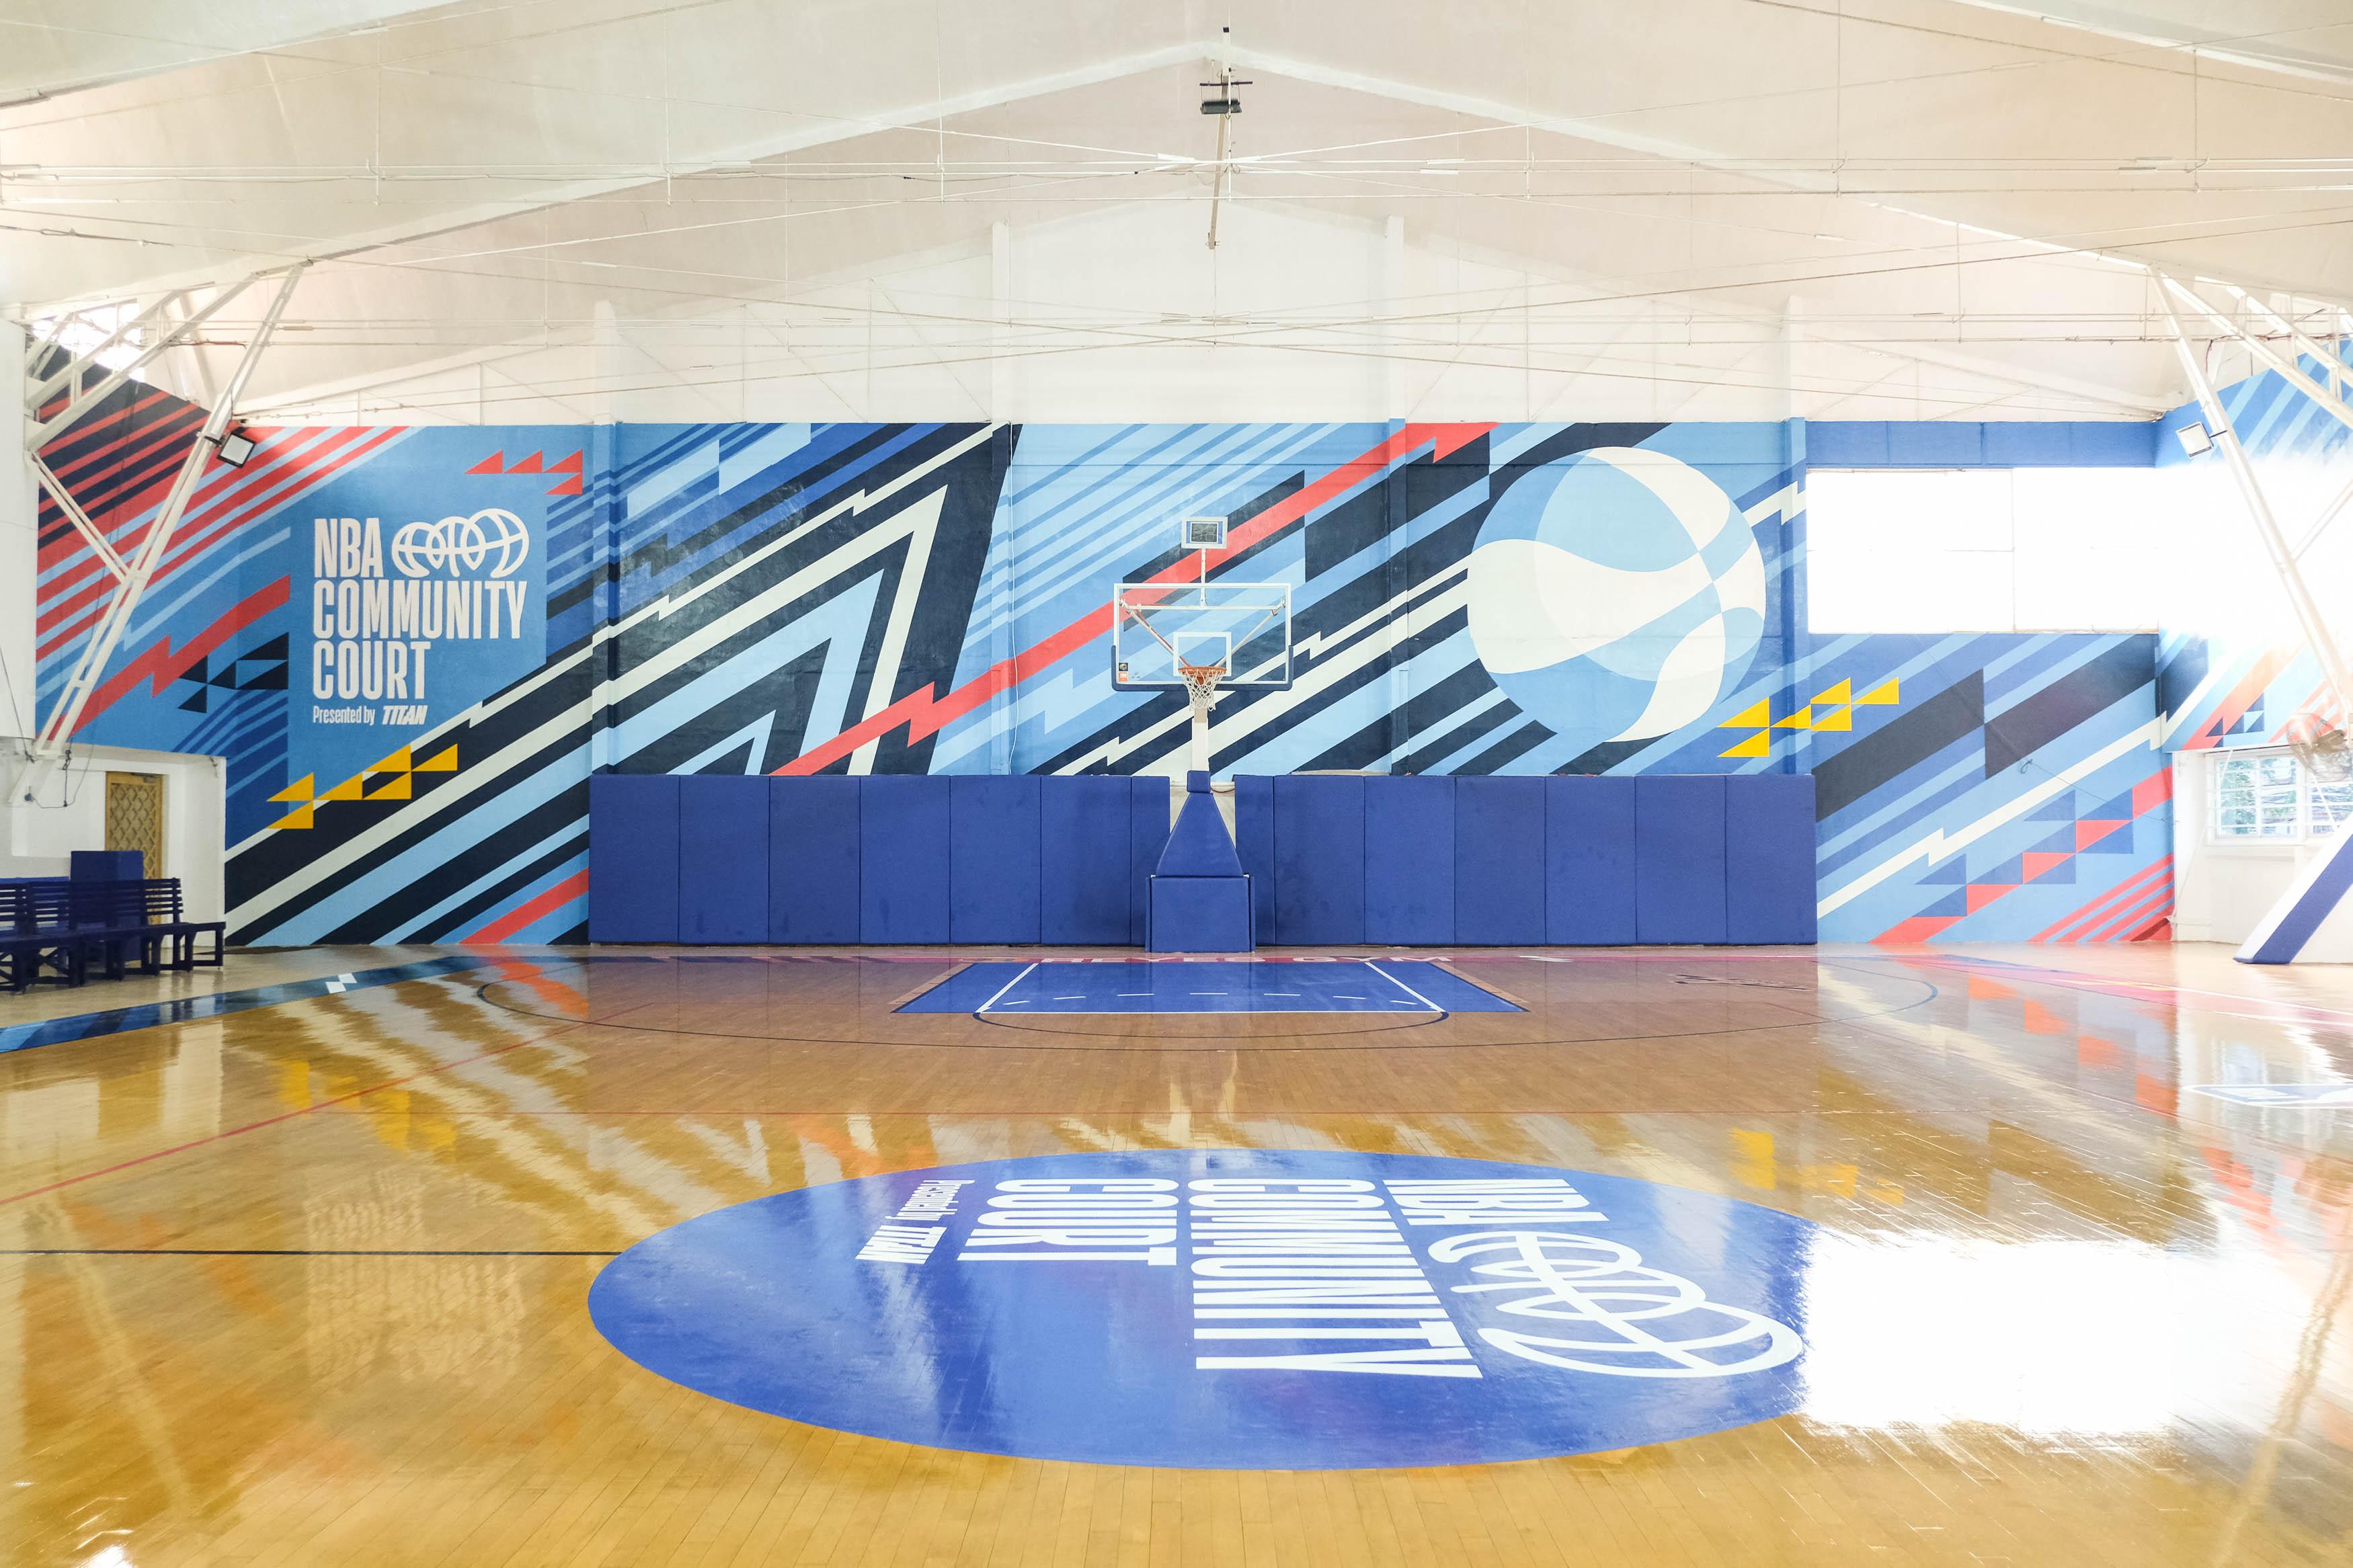 Reyes Gym becomes 'NBA Community Court